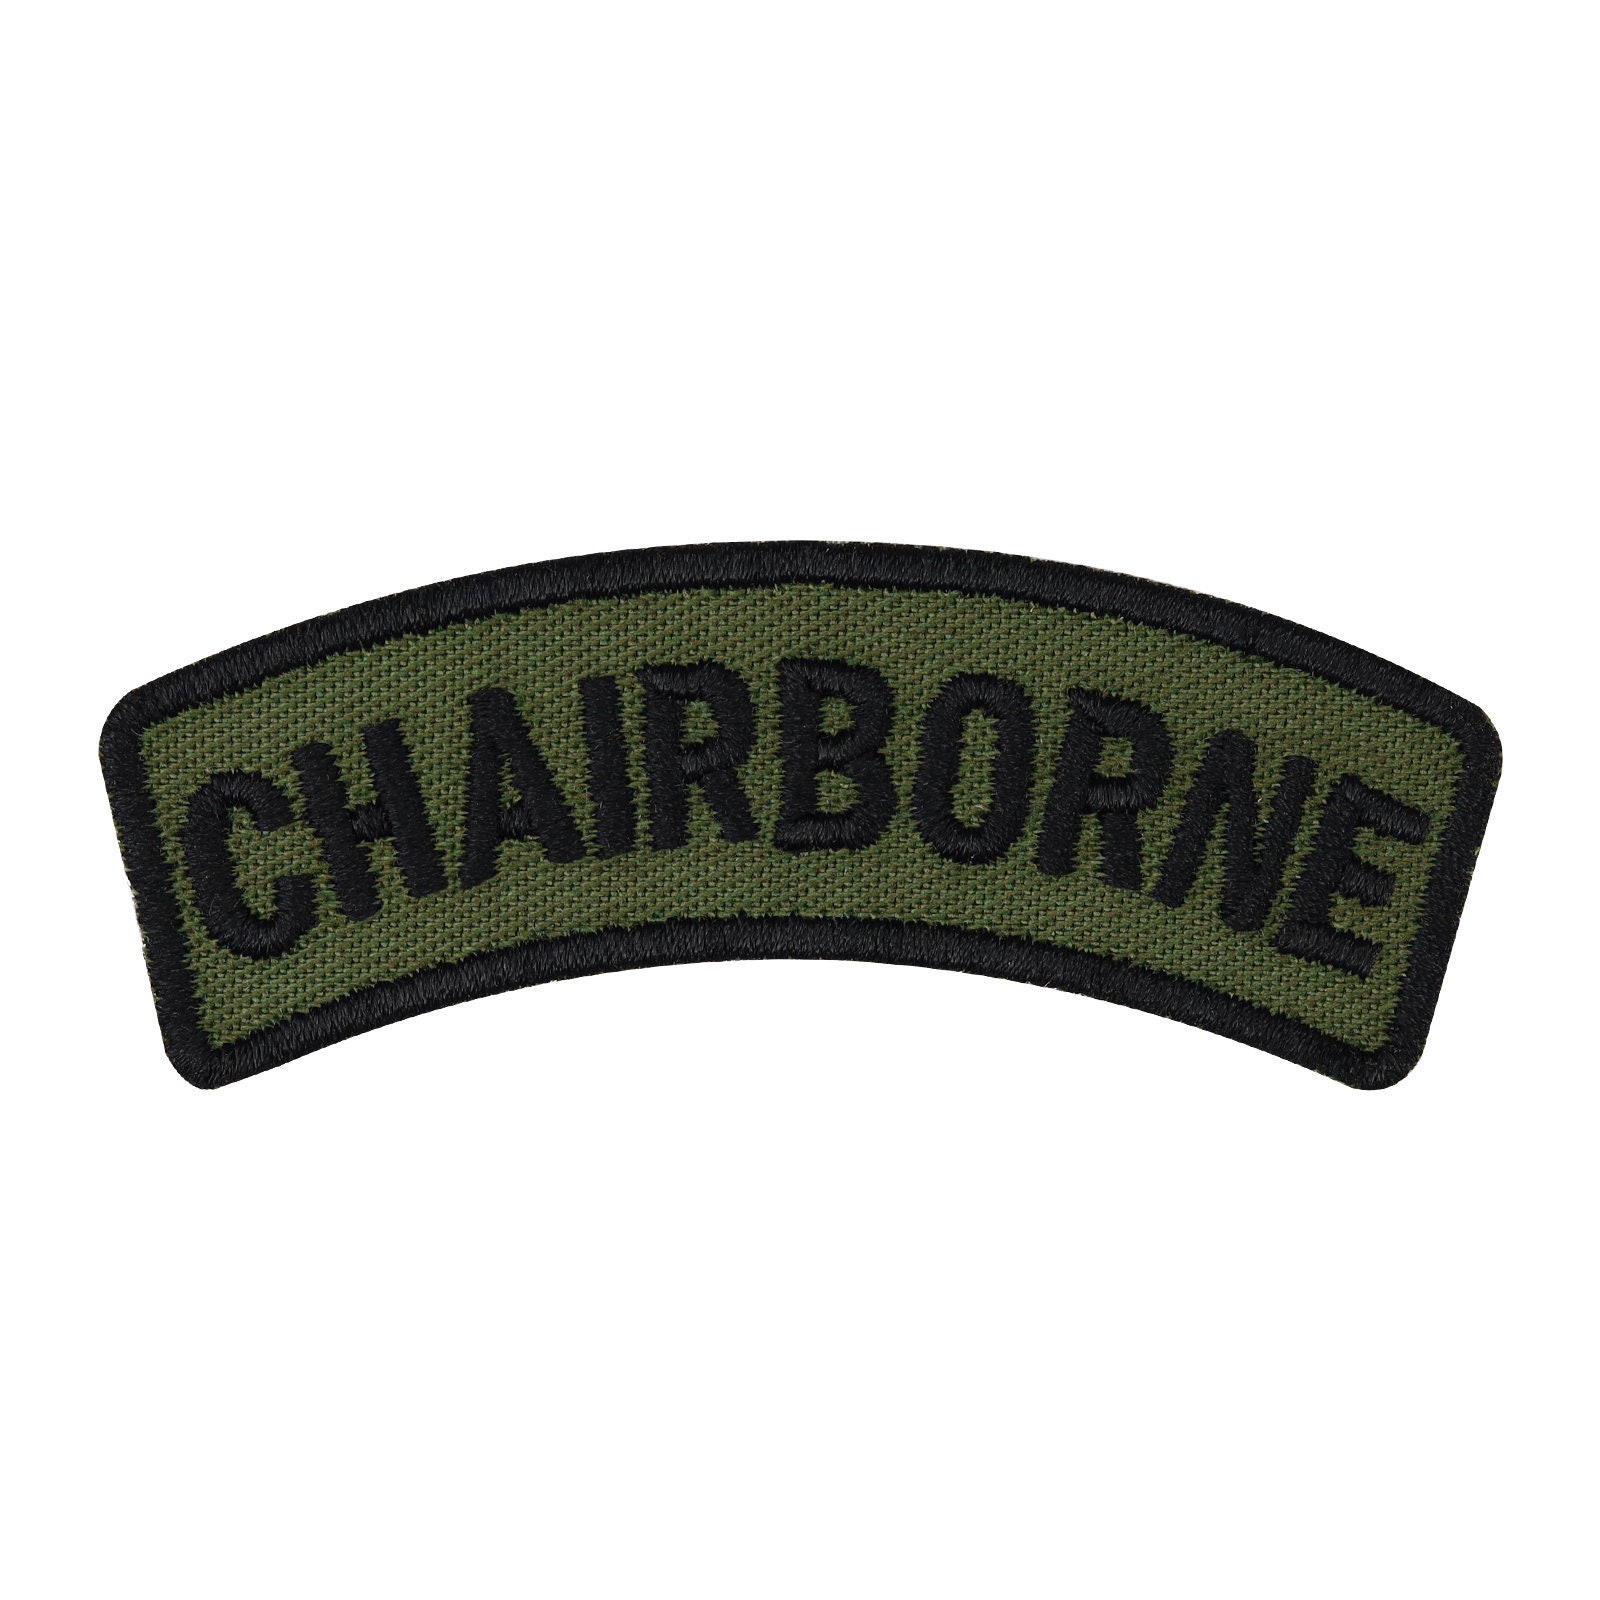 Patch militaire : Chairborne thermocollant Morale Patch Army application 70  x 20 mm -  France